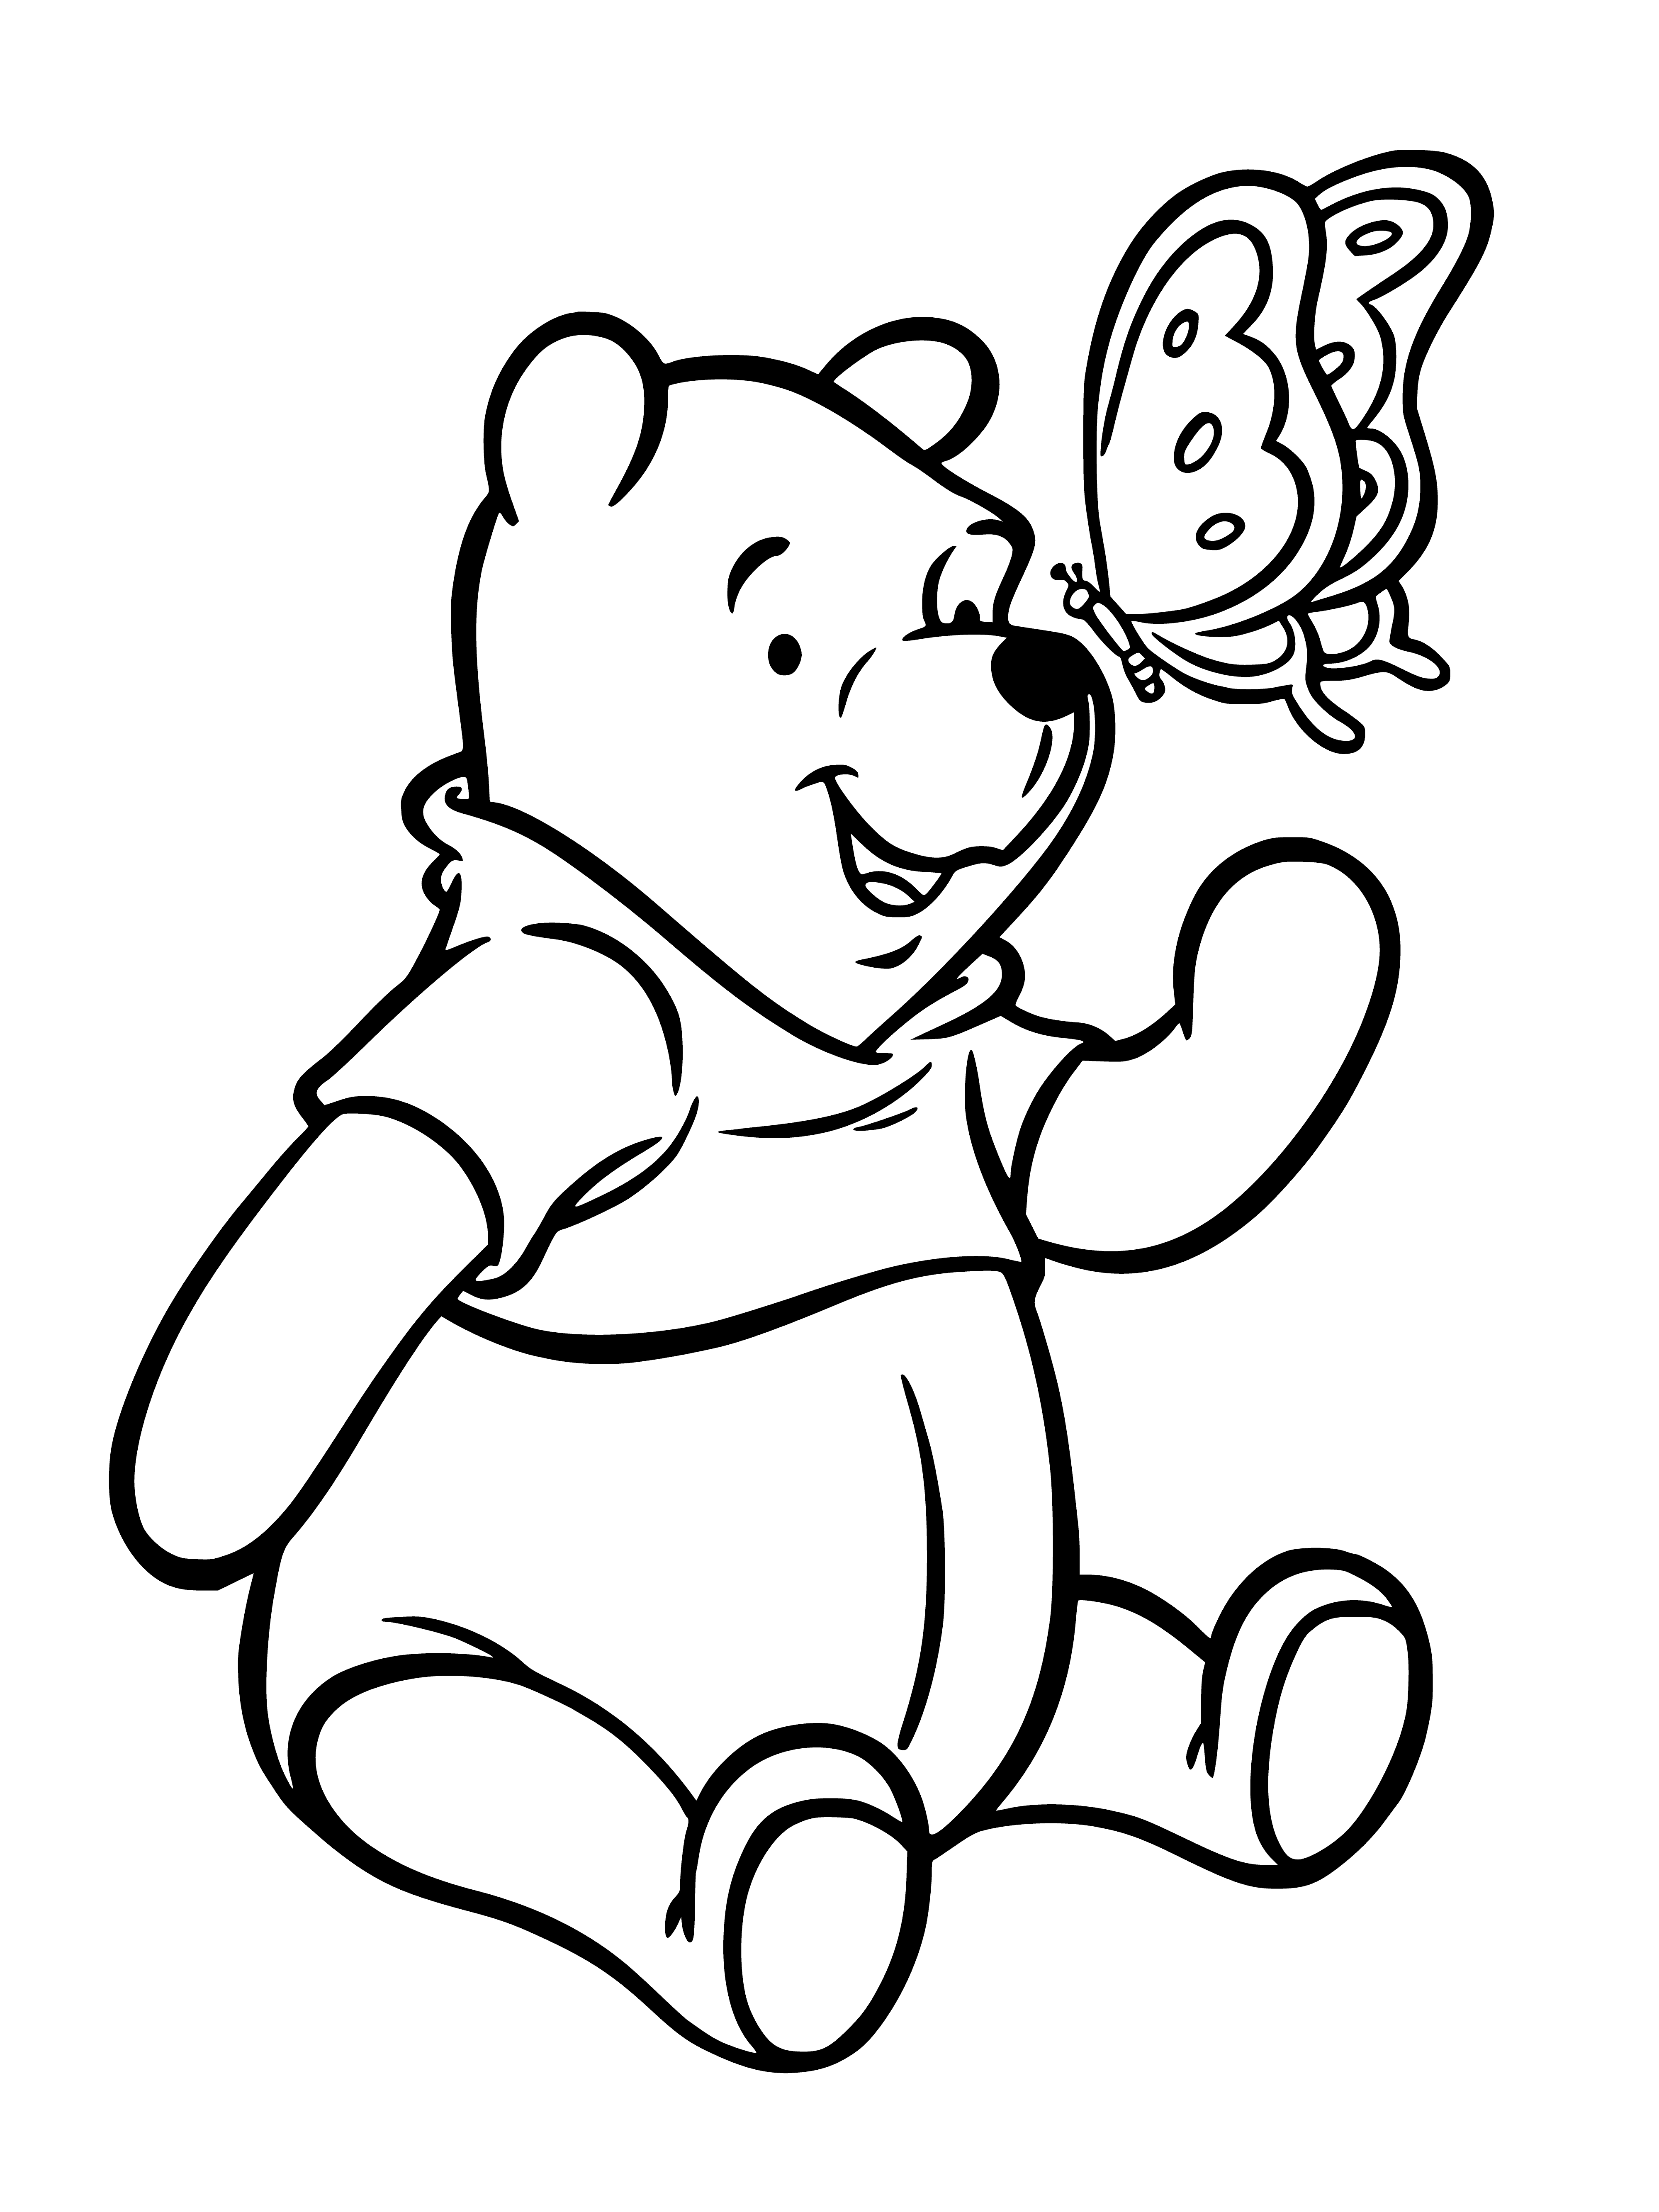 coloring page: Winnie the Pooh chases a flitty butterfly across a field of flowers, tongue out in concentration.